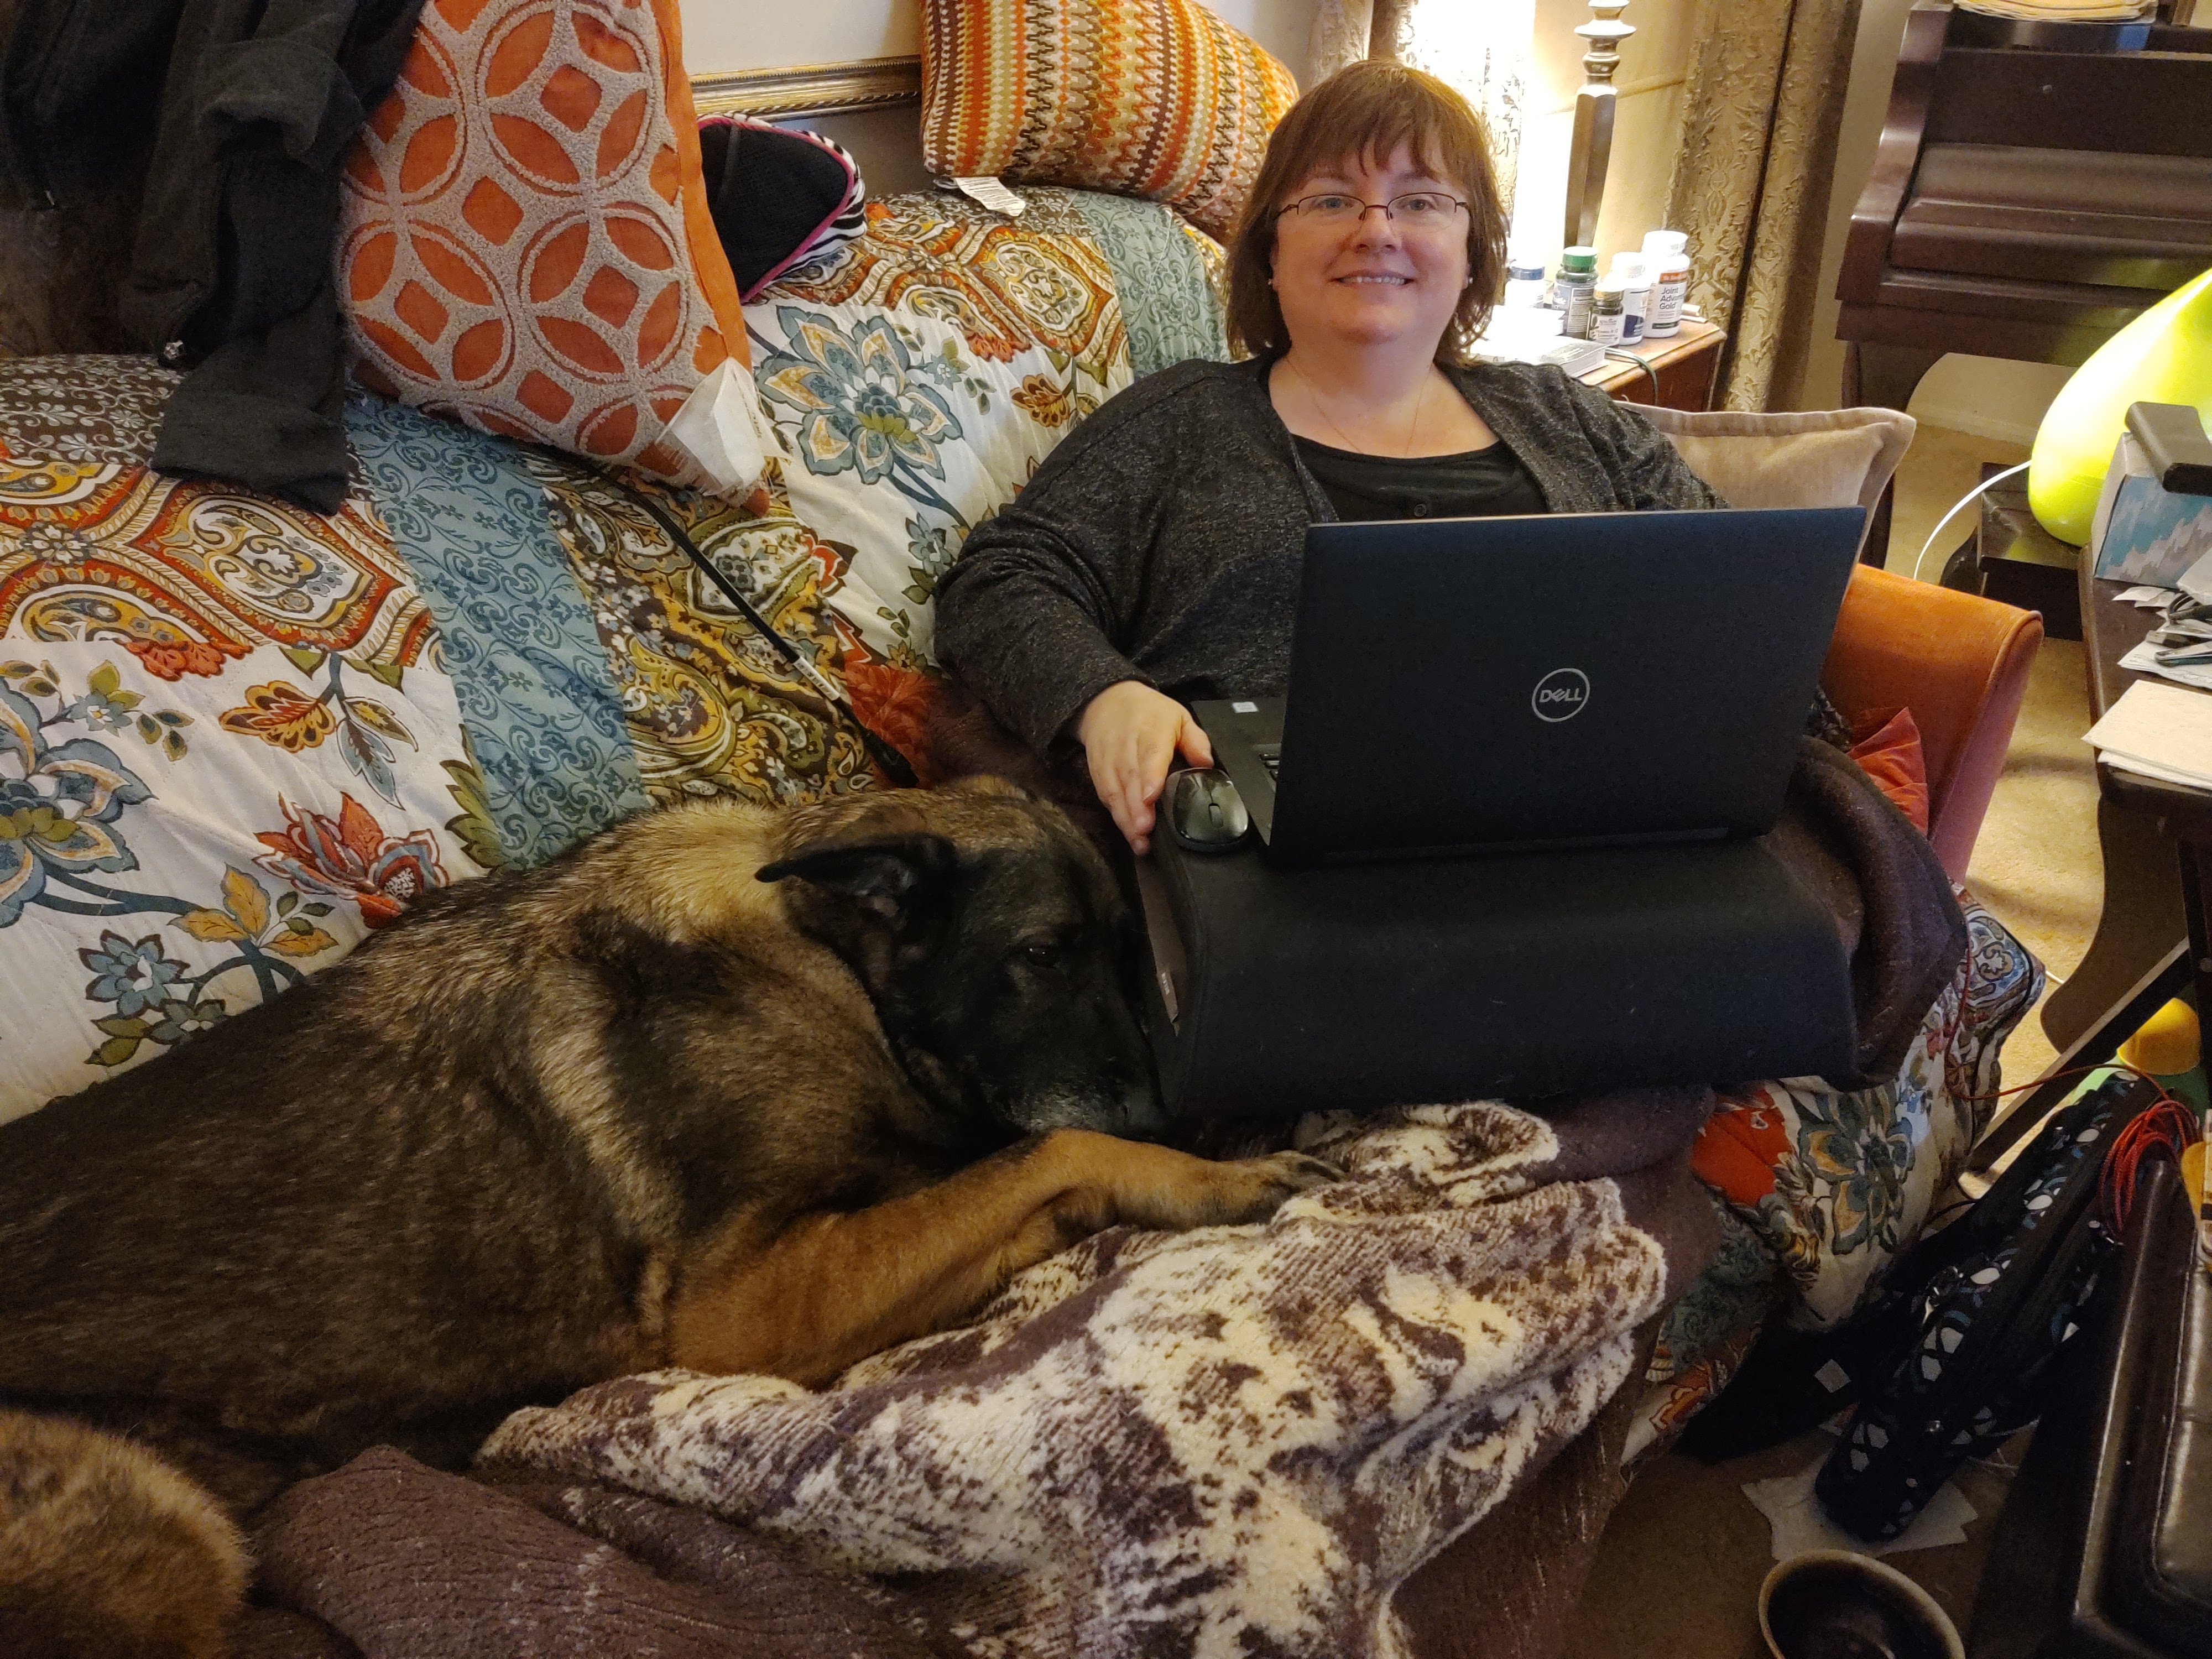 A dog sitting next to a woman with a laptop